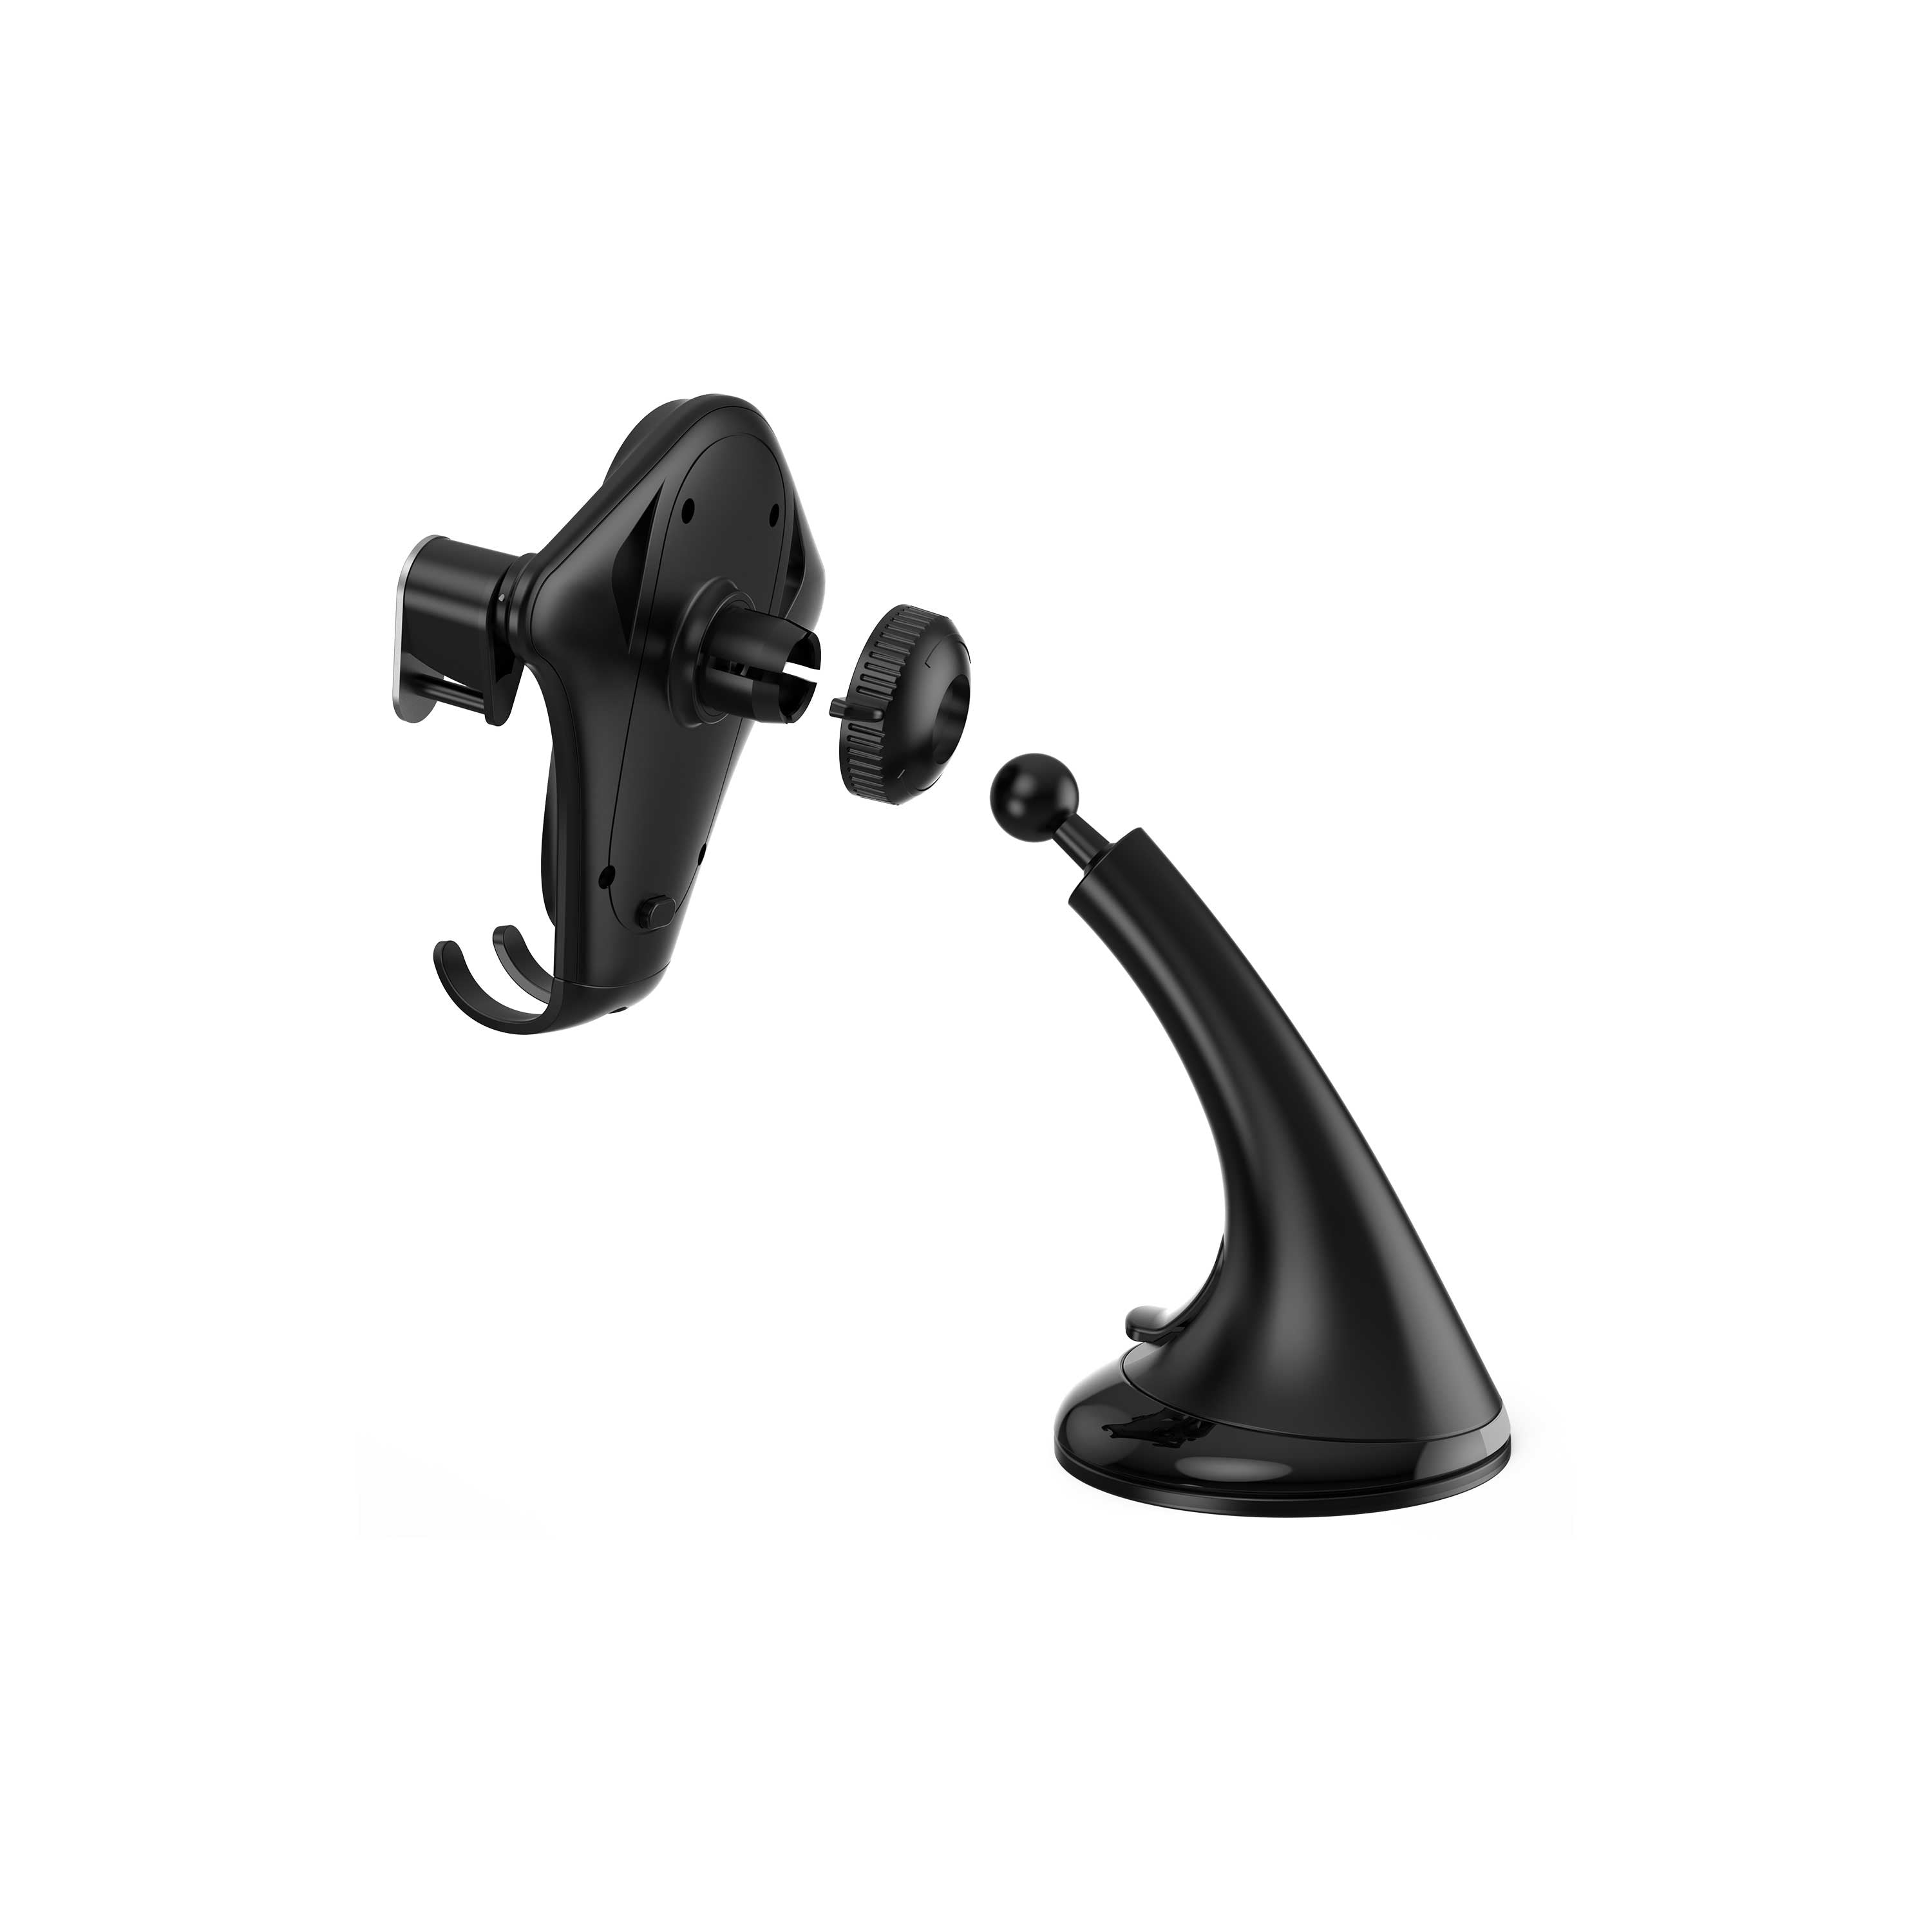 Wiwu CH019 Suction Cup Design Car Phone Holder Working With Phone Weight